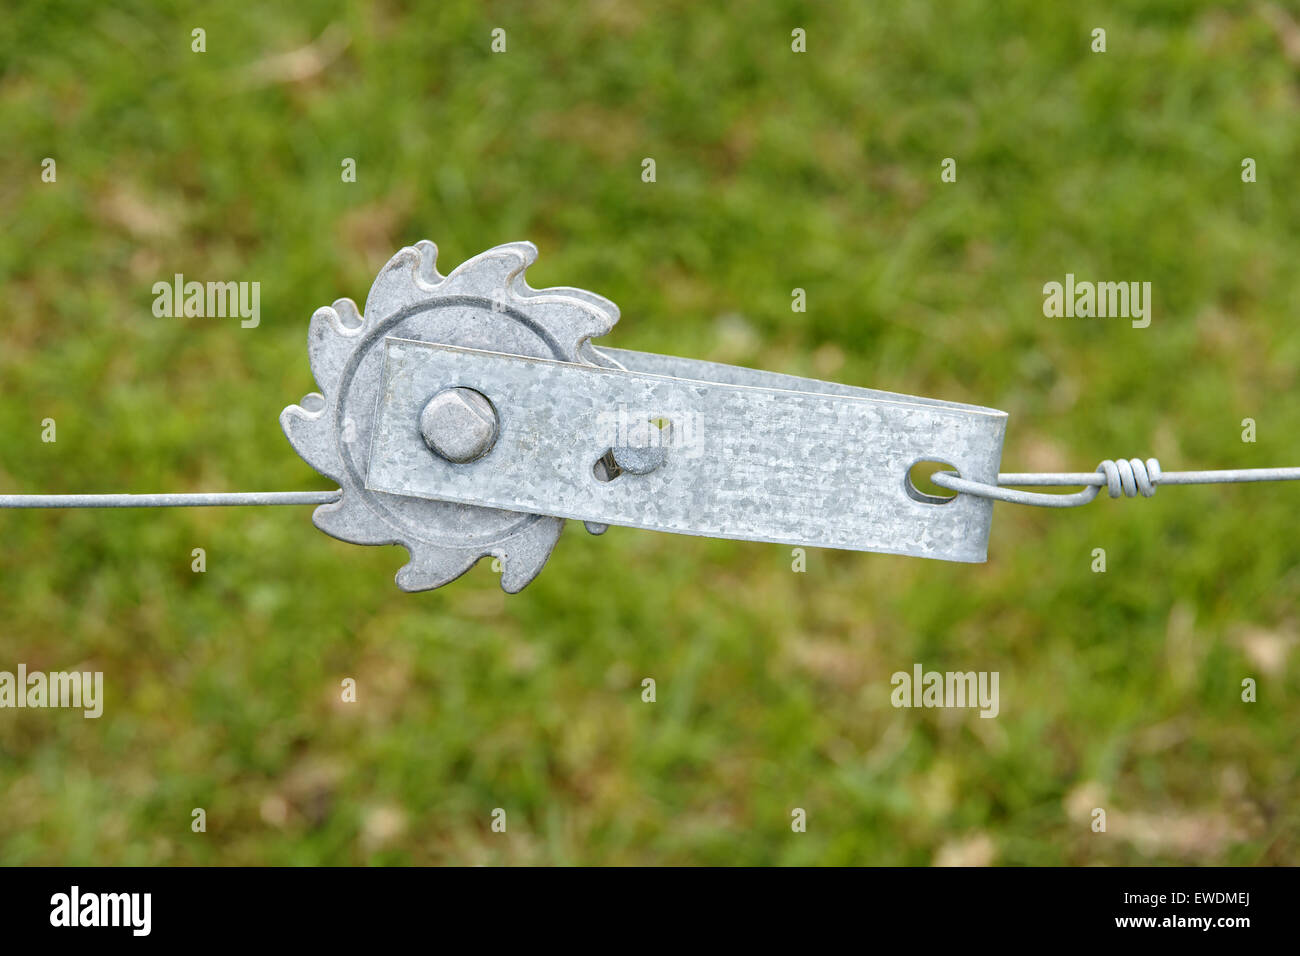 Ratchet fence tensioner for tightening wire stock fences on farms Stock Photo